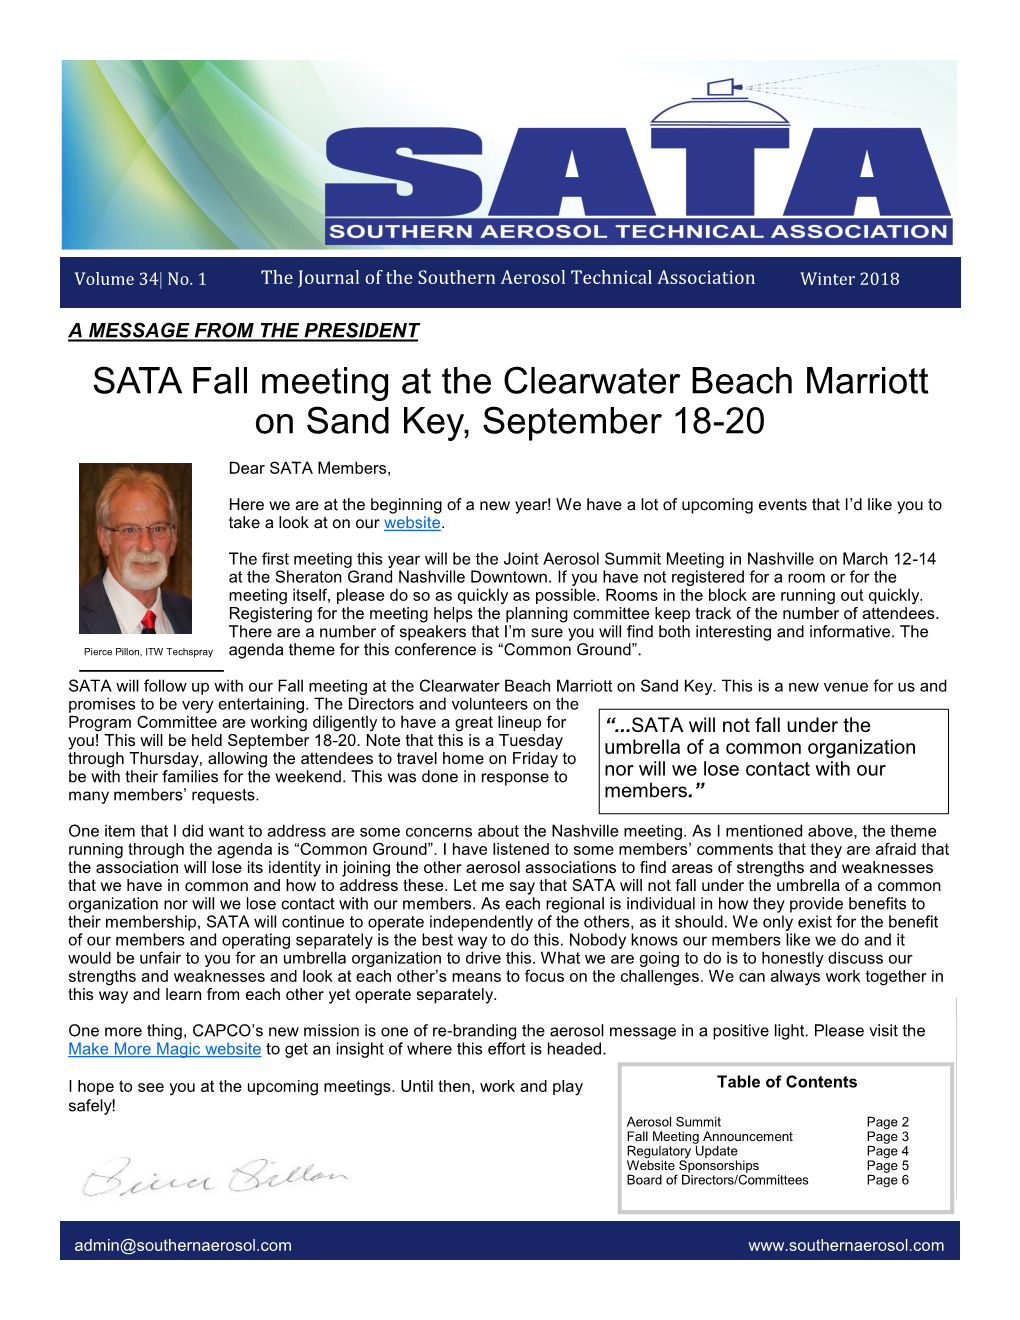 SATA Fall Meeting at the Clearwater Beach Marriott on Sand Key